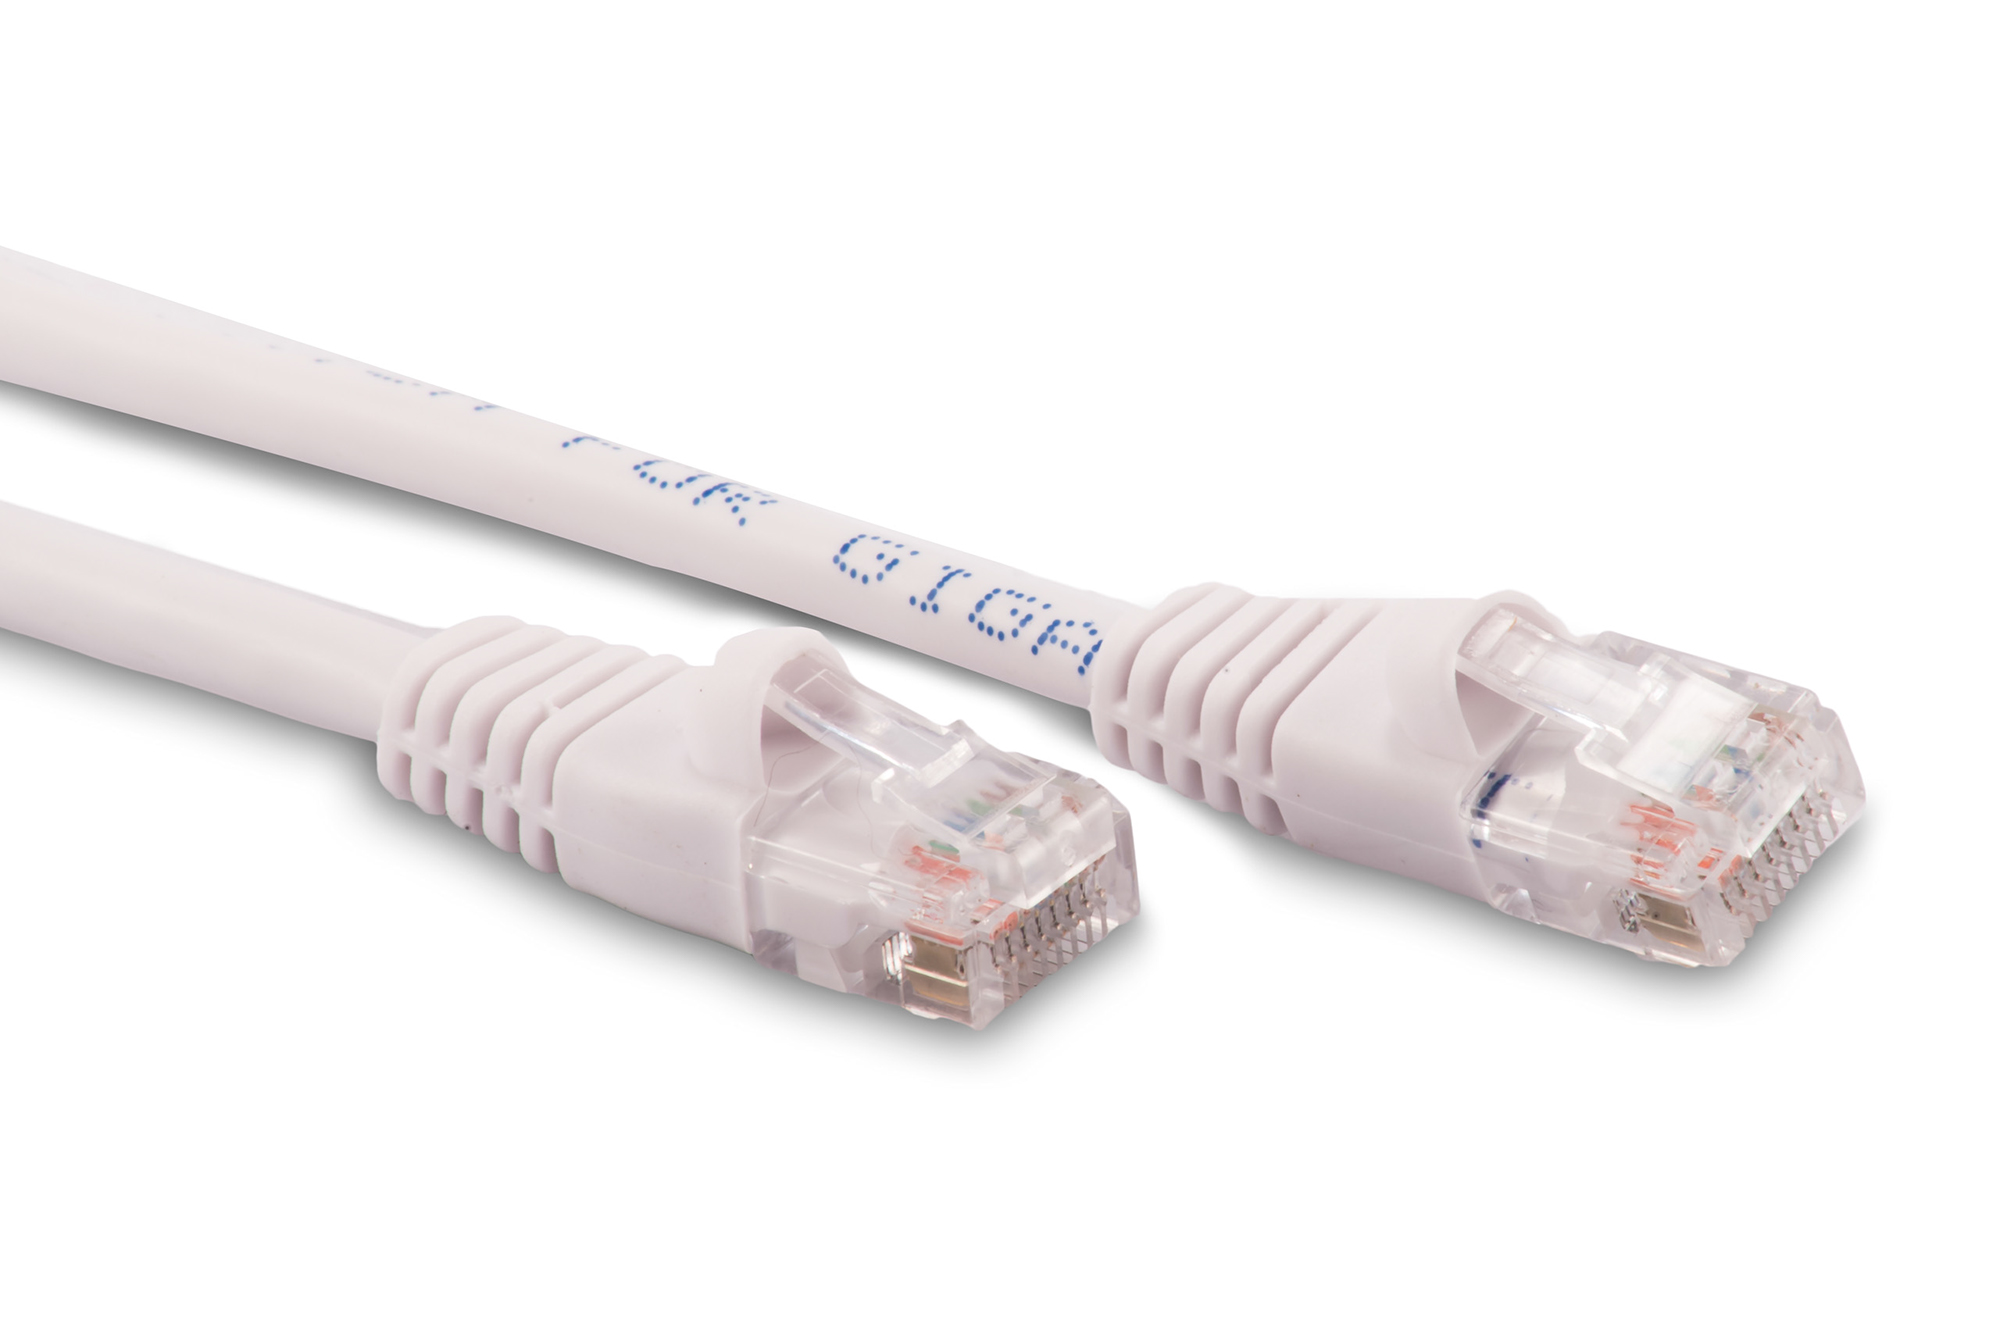 14ft Cat6 Ethernet Patch Cable - White Color - Snagless Boot